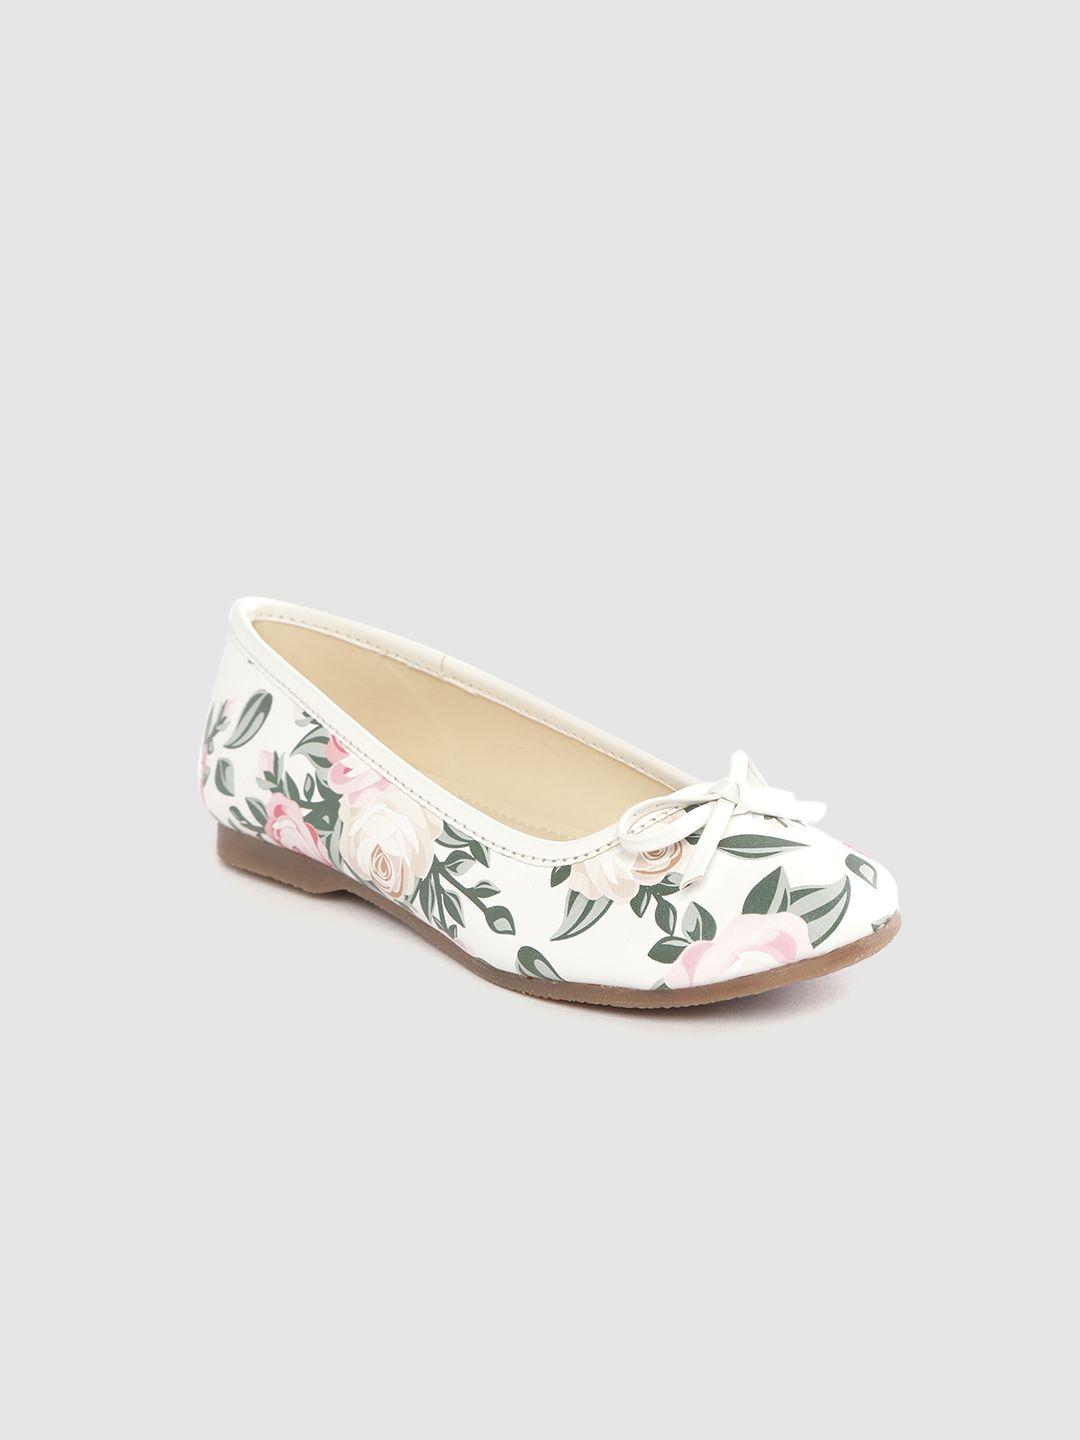 yk girls white & green floral print ballerinas with bow detail